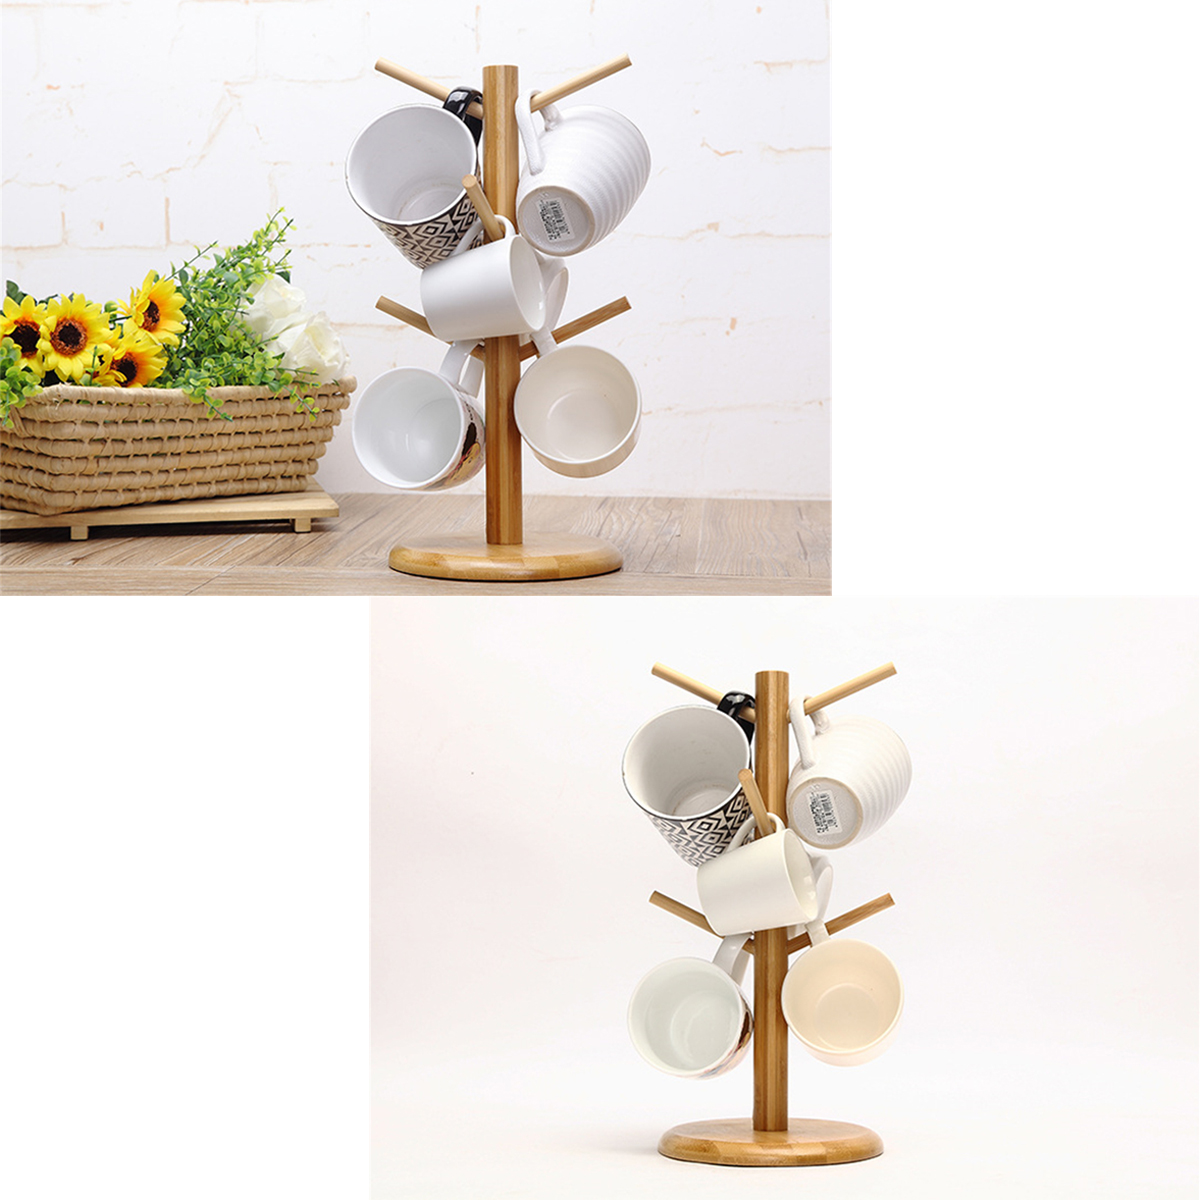 Wooden-Cup-Holder-Teacup-Mug-Drain-Rack-Stand-6-Cups-Drain-Cup-Hanging-Stand-Coffee-Cup-Display-Stan-1777089-8